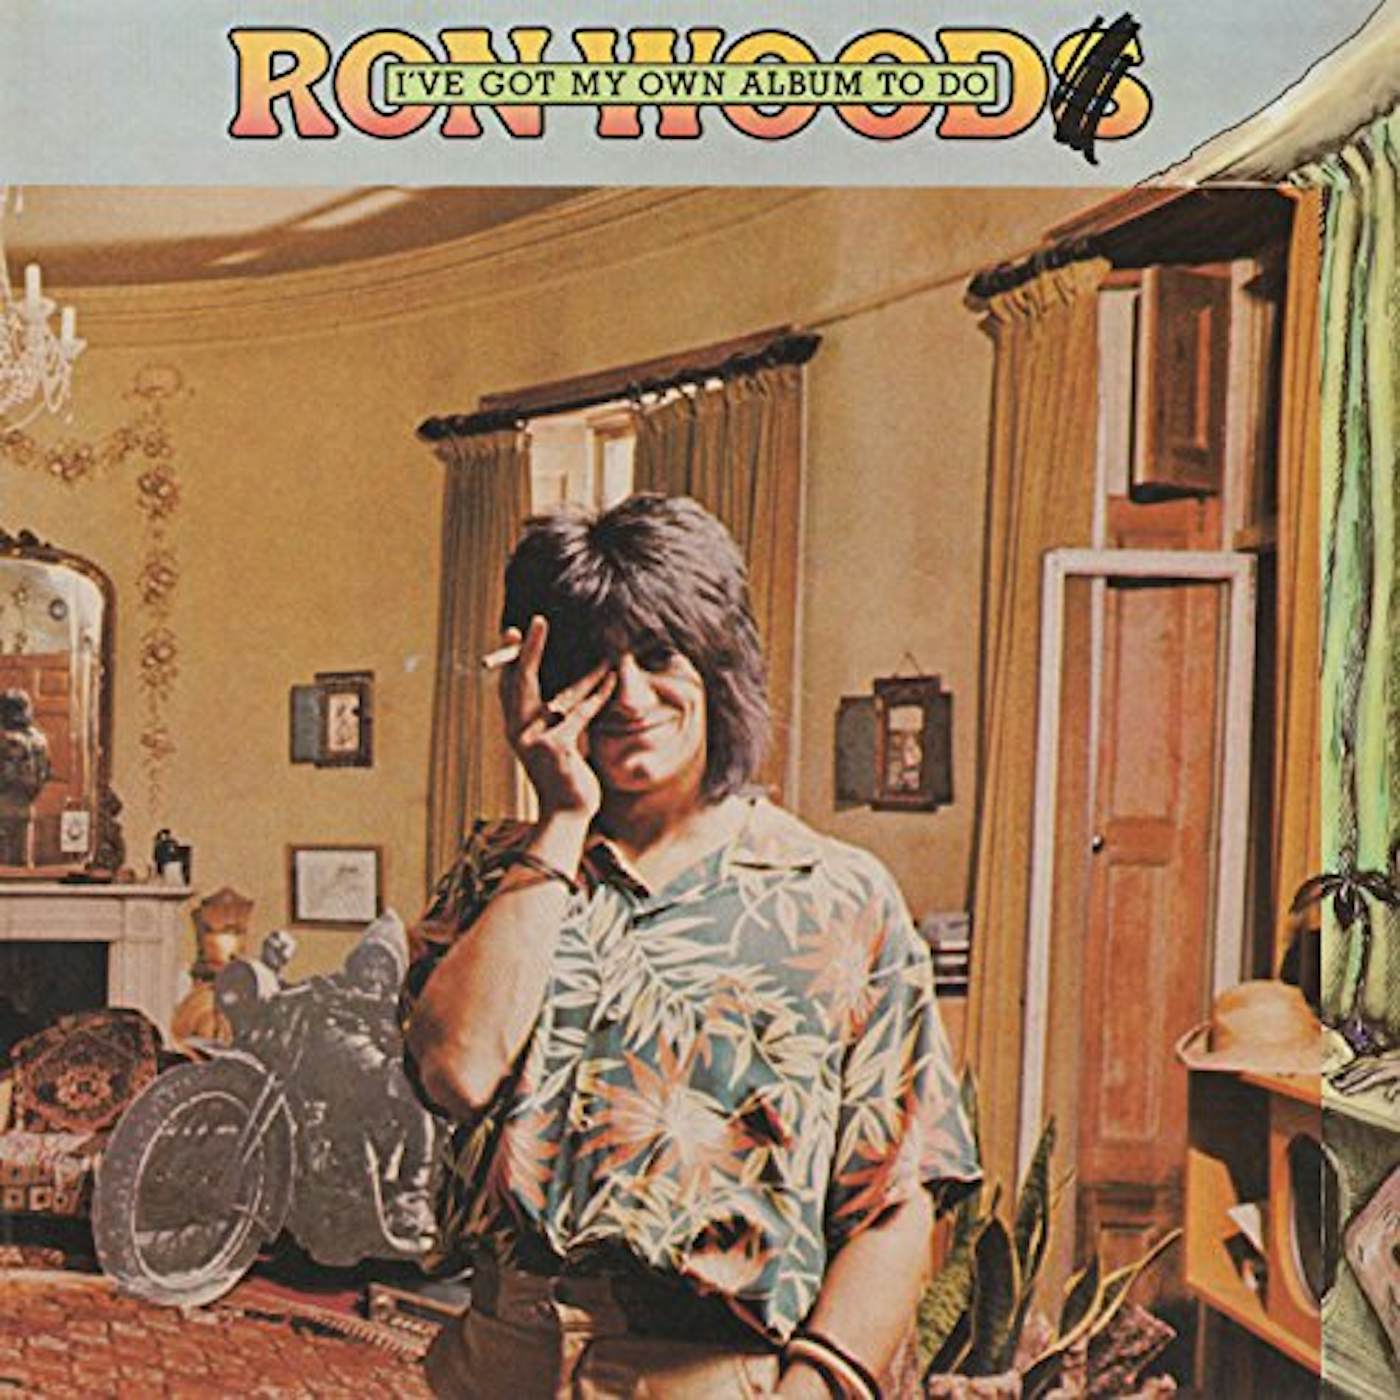 Ronnie Wood I'VE GOT MY OWN ALBUM TO DO & NOW LOOK CD